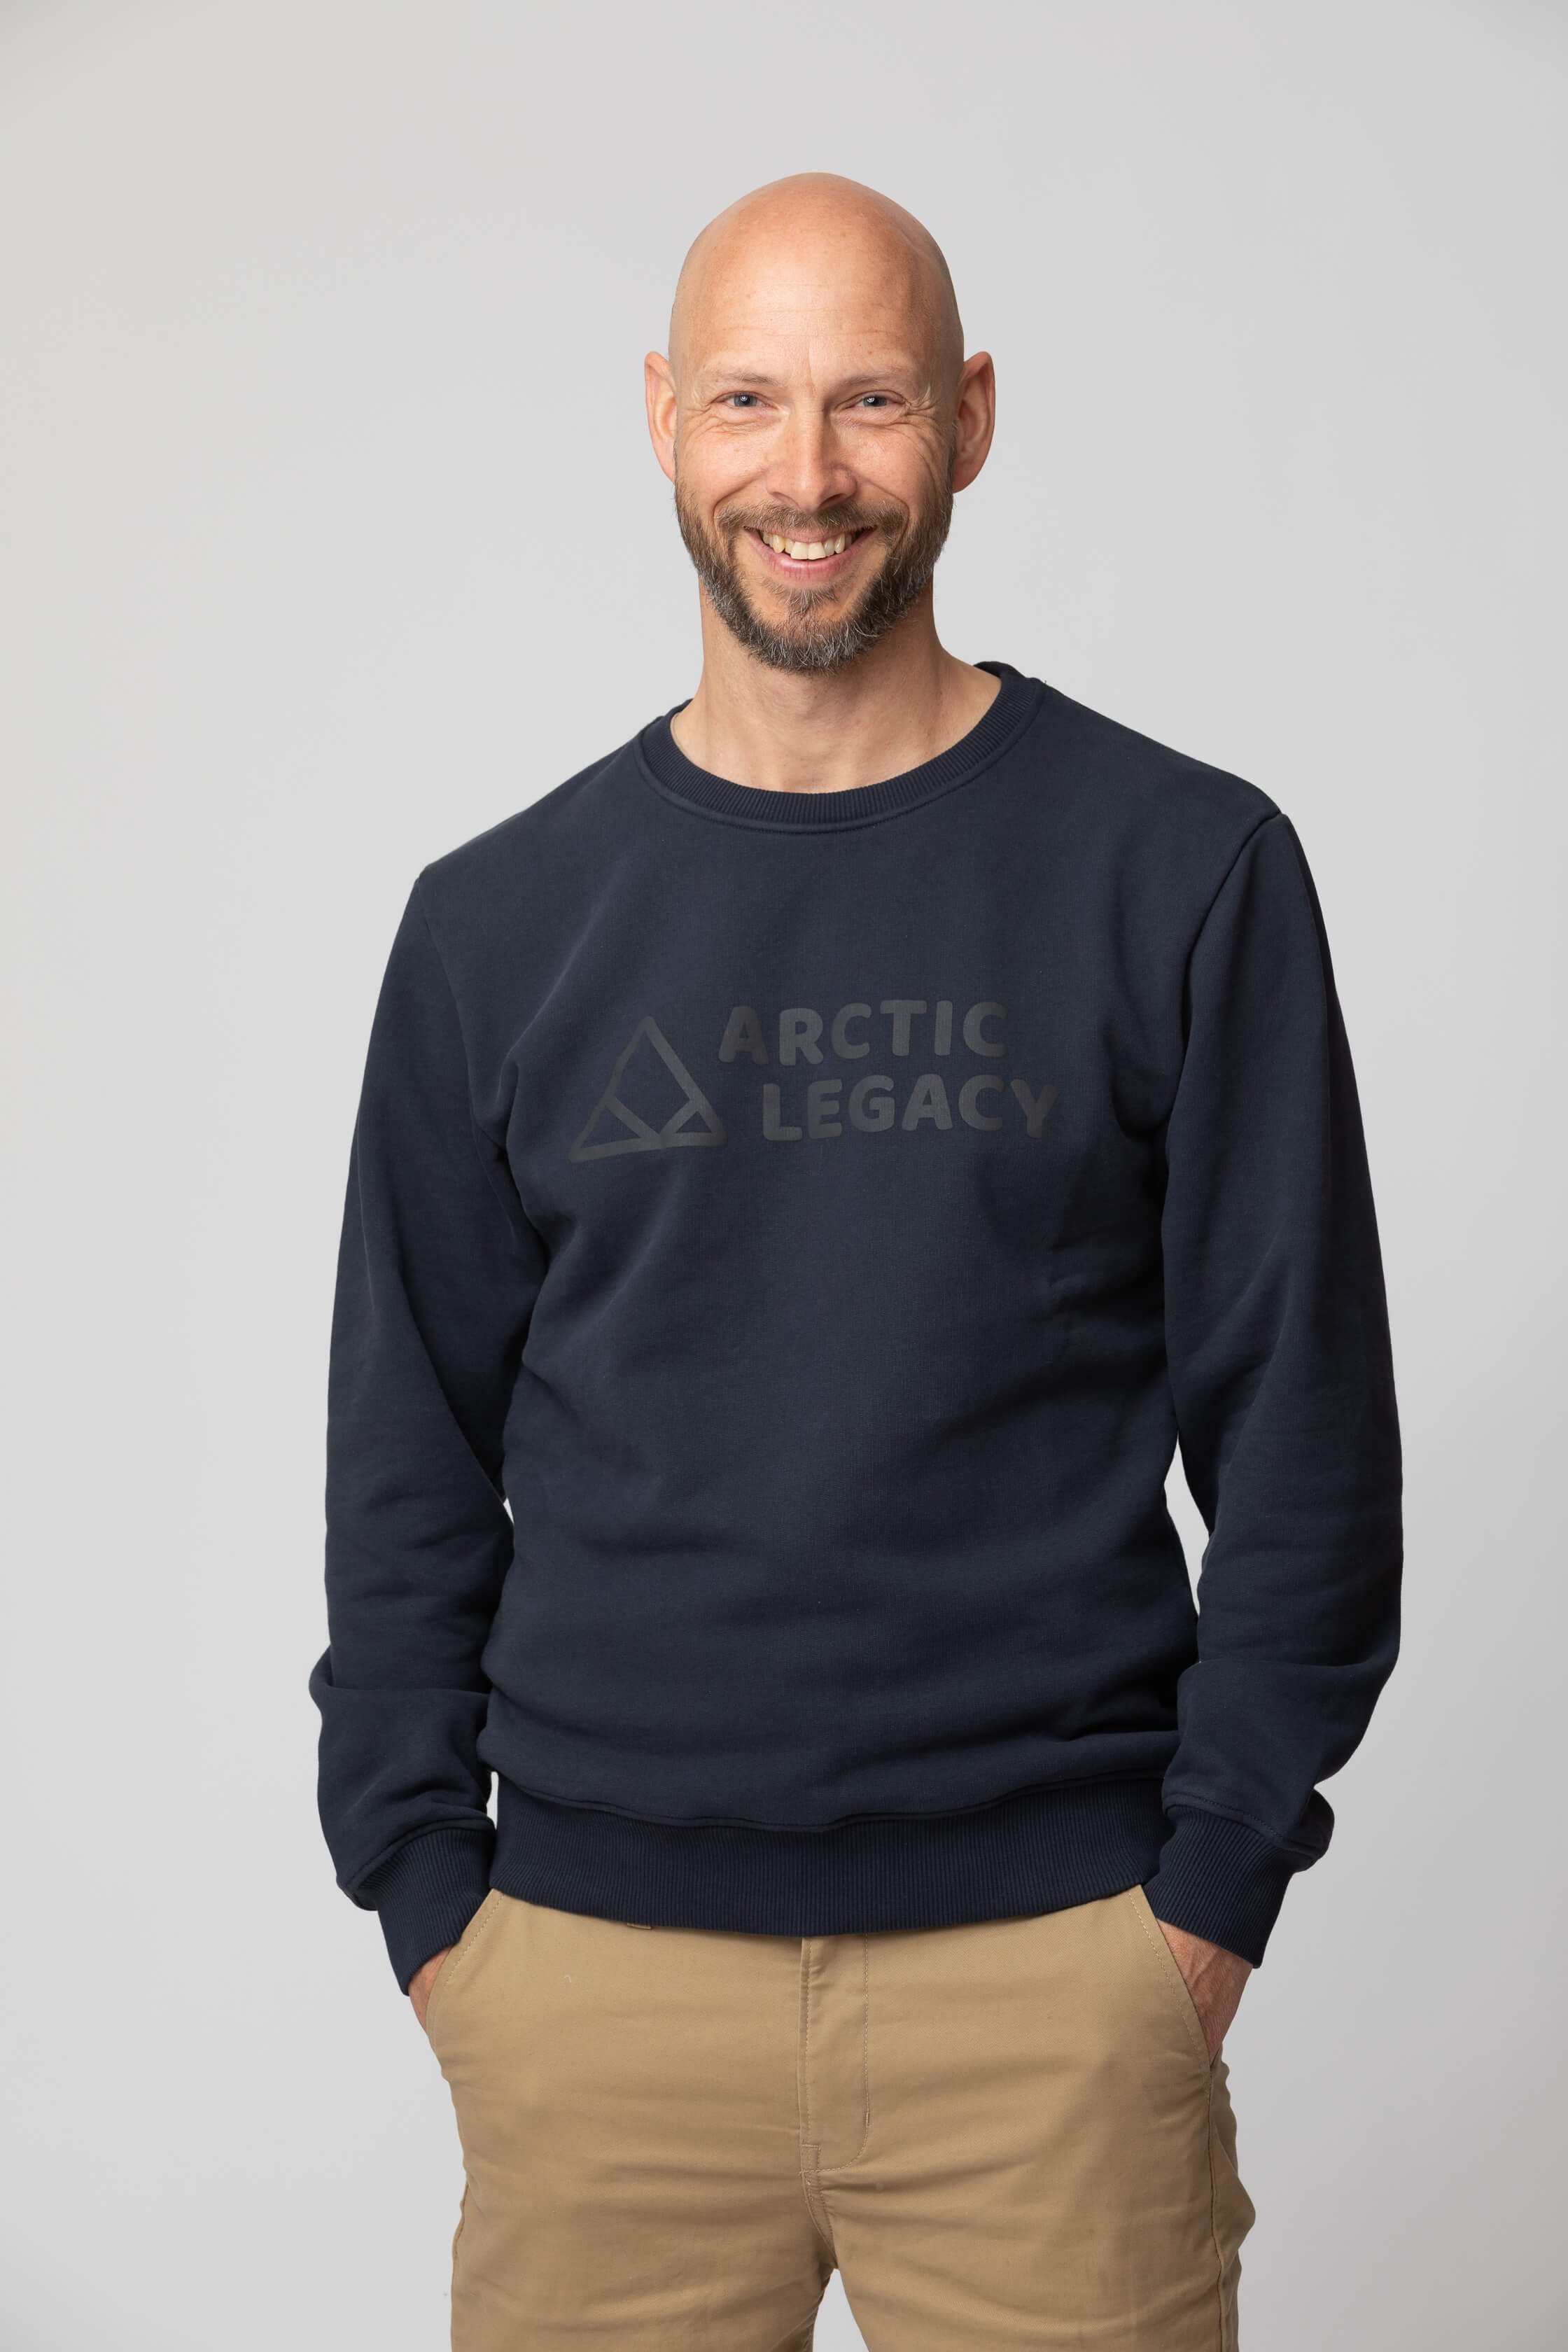 Ember Organic Crew Sweater for in Made - Legacy Men Europe Arctic 